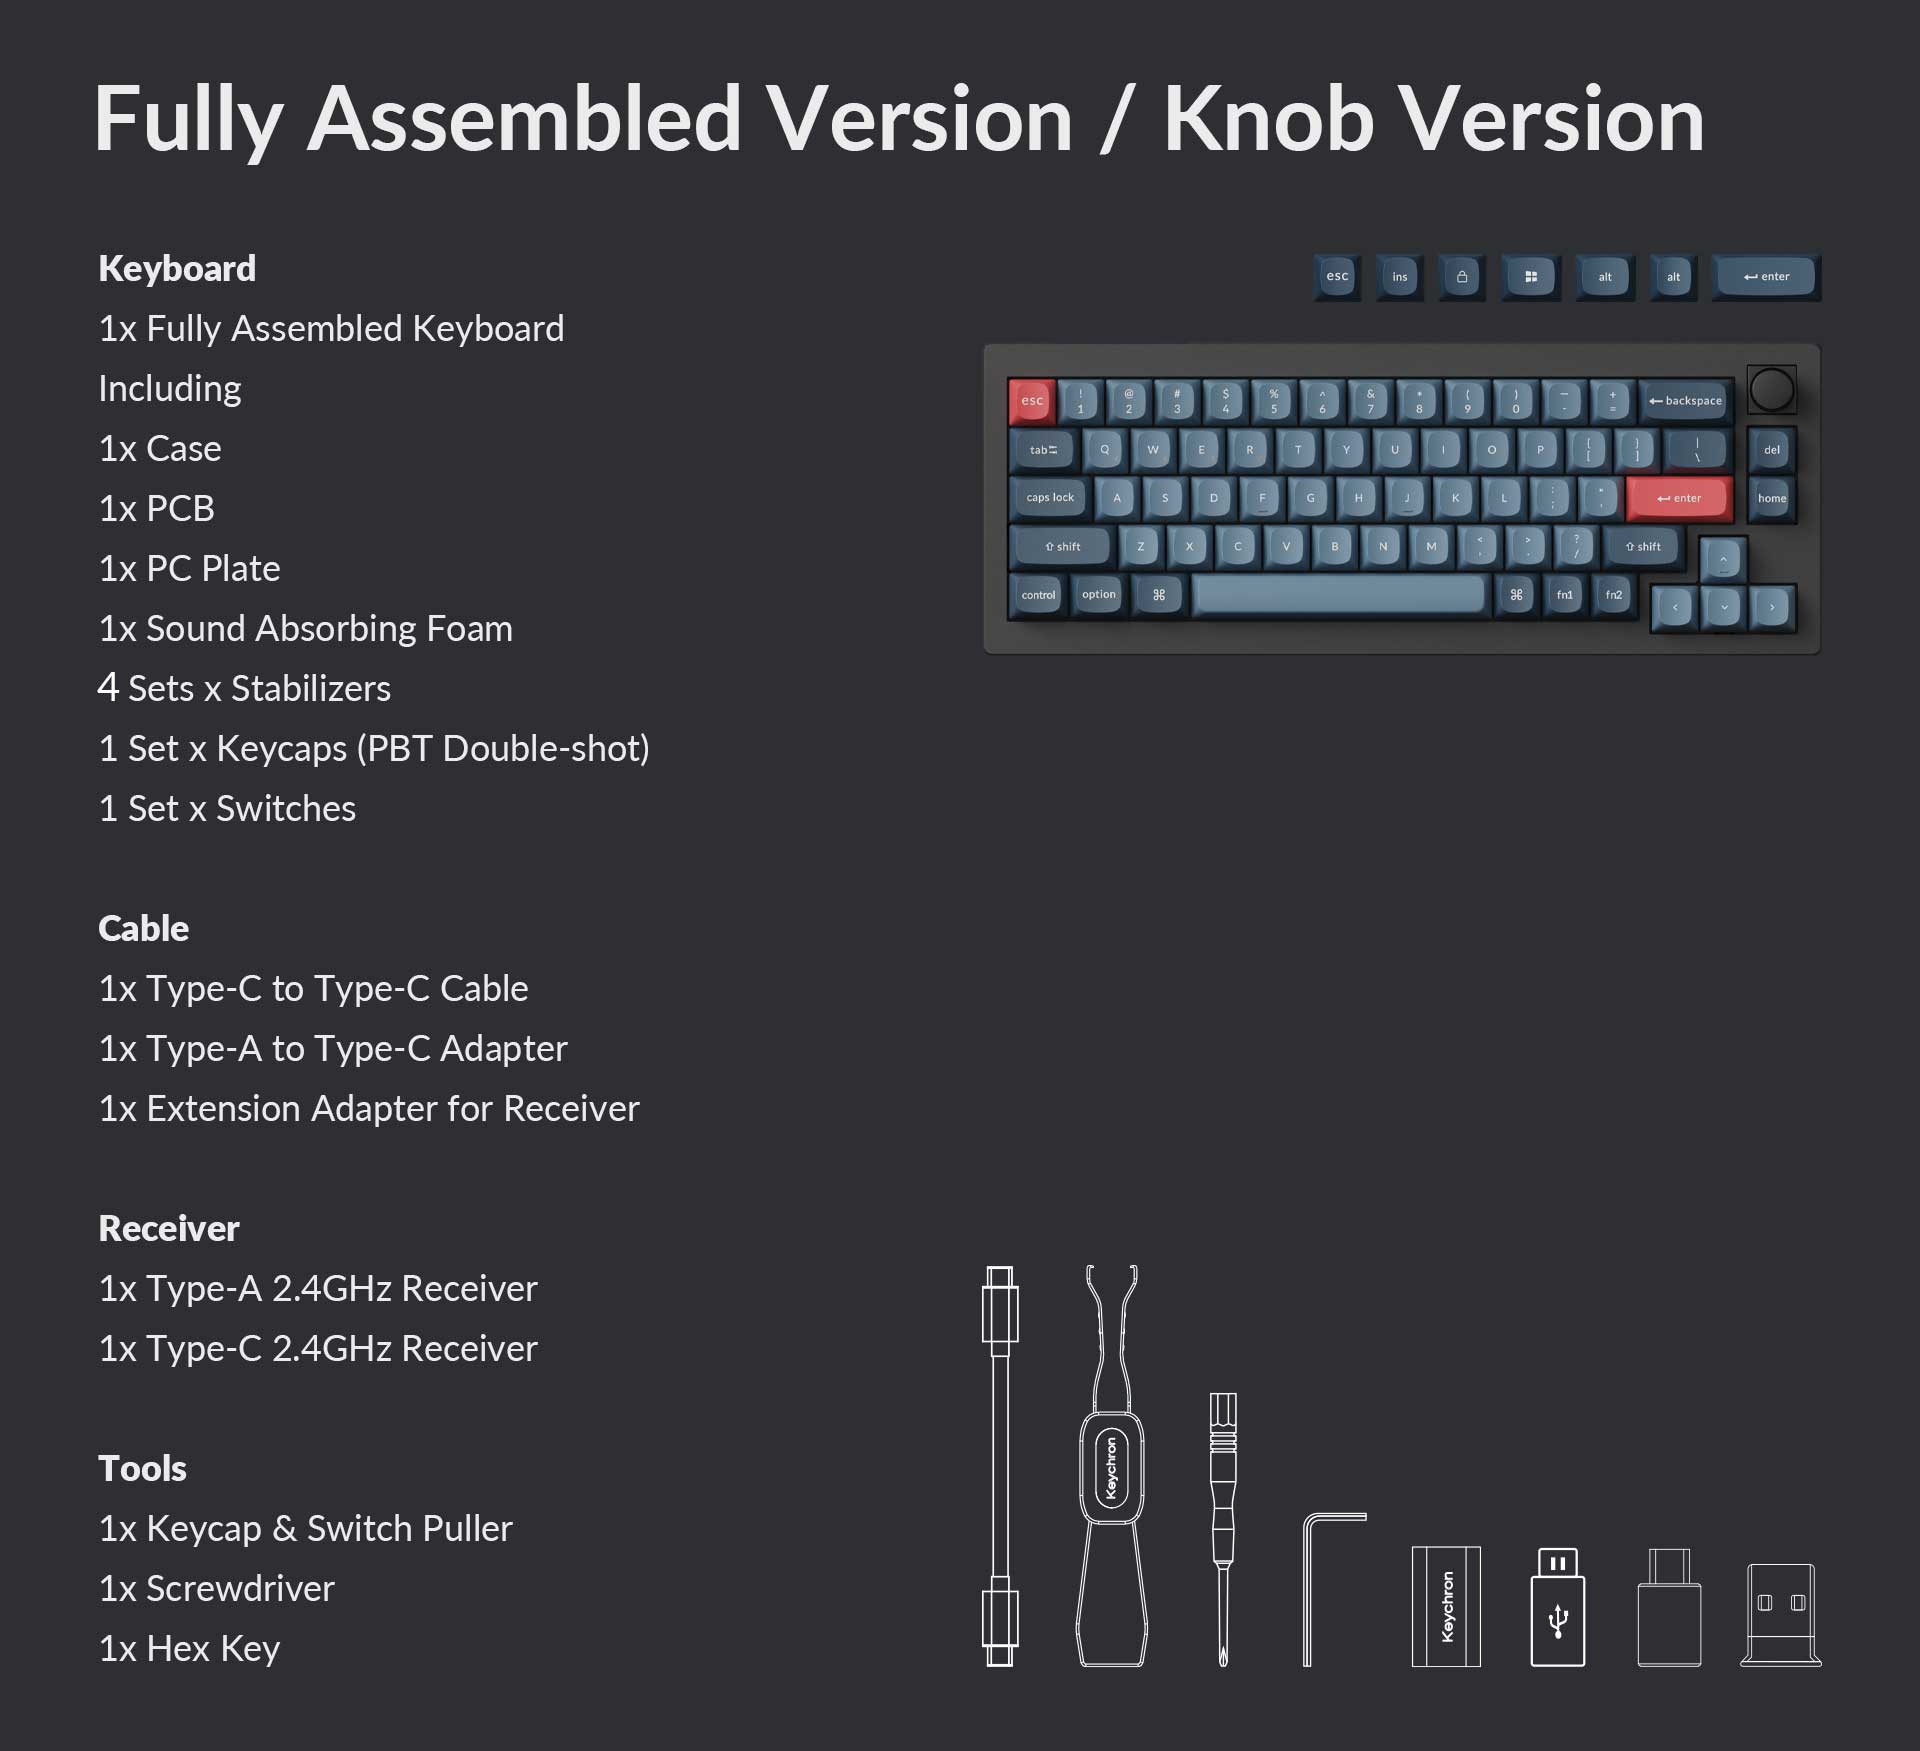 package-list-of-the-keychron-v2-max-fully-assembled-knob-version__PID:bfa9dd8d-5e3c-4373-8038-8a64279c630d